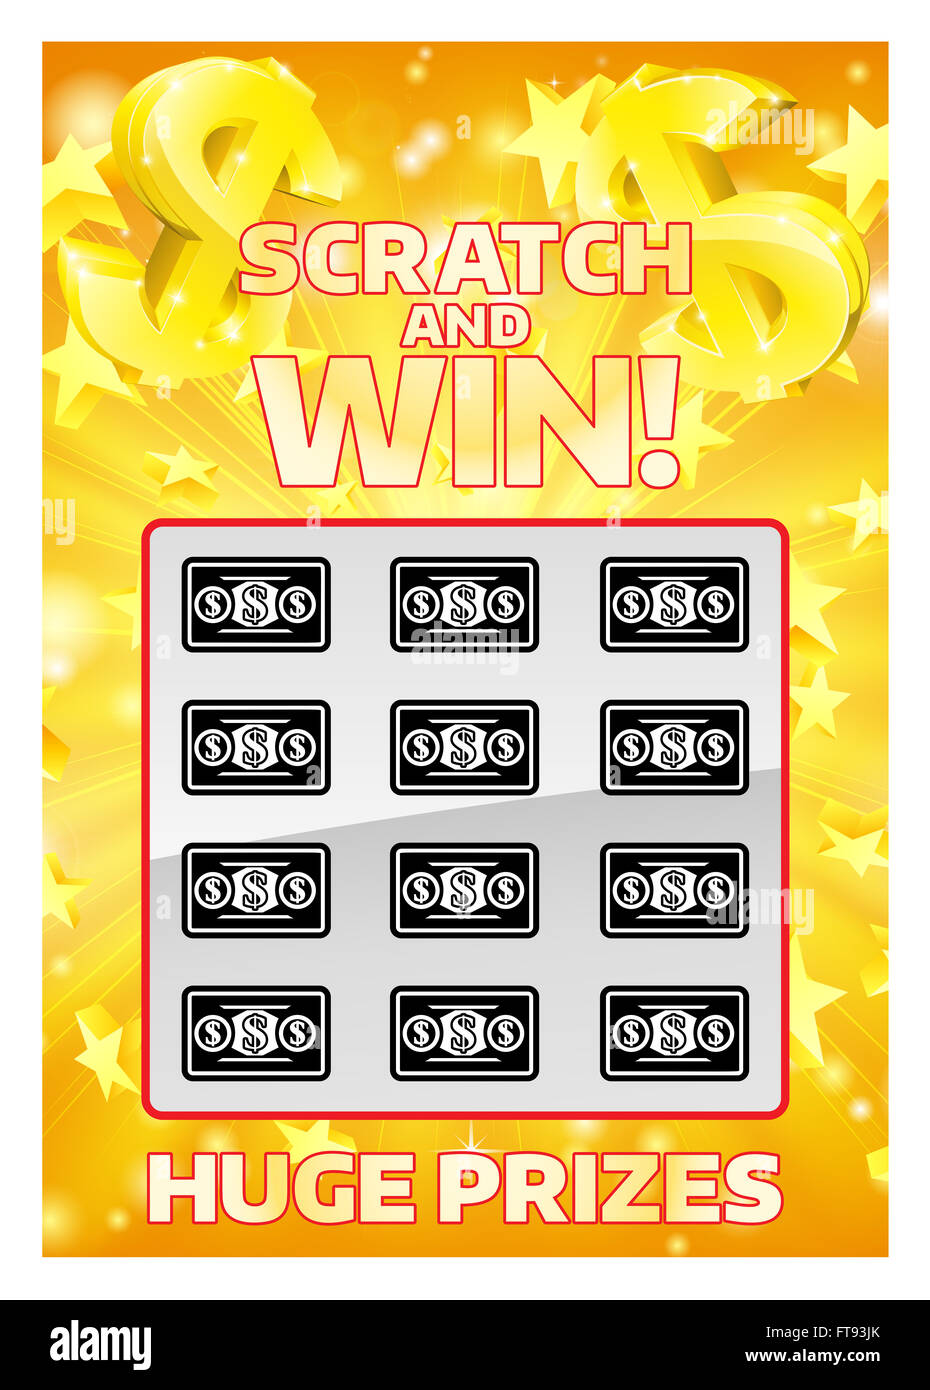 An illustration of a lottery instant scratch and win scratchcard Stock Photo